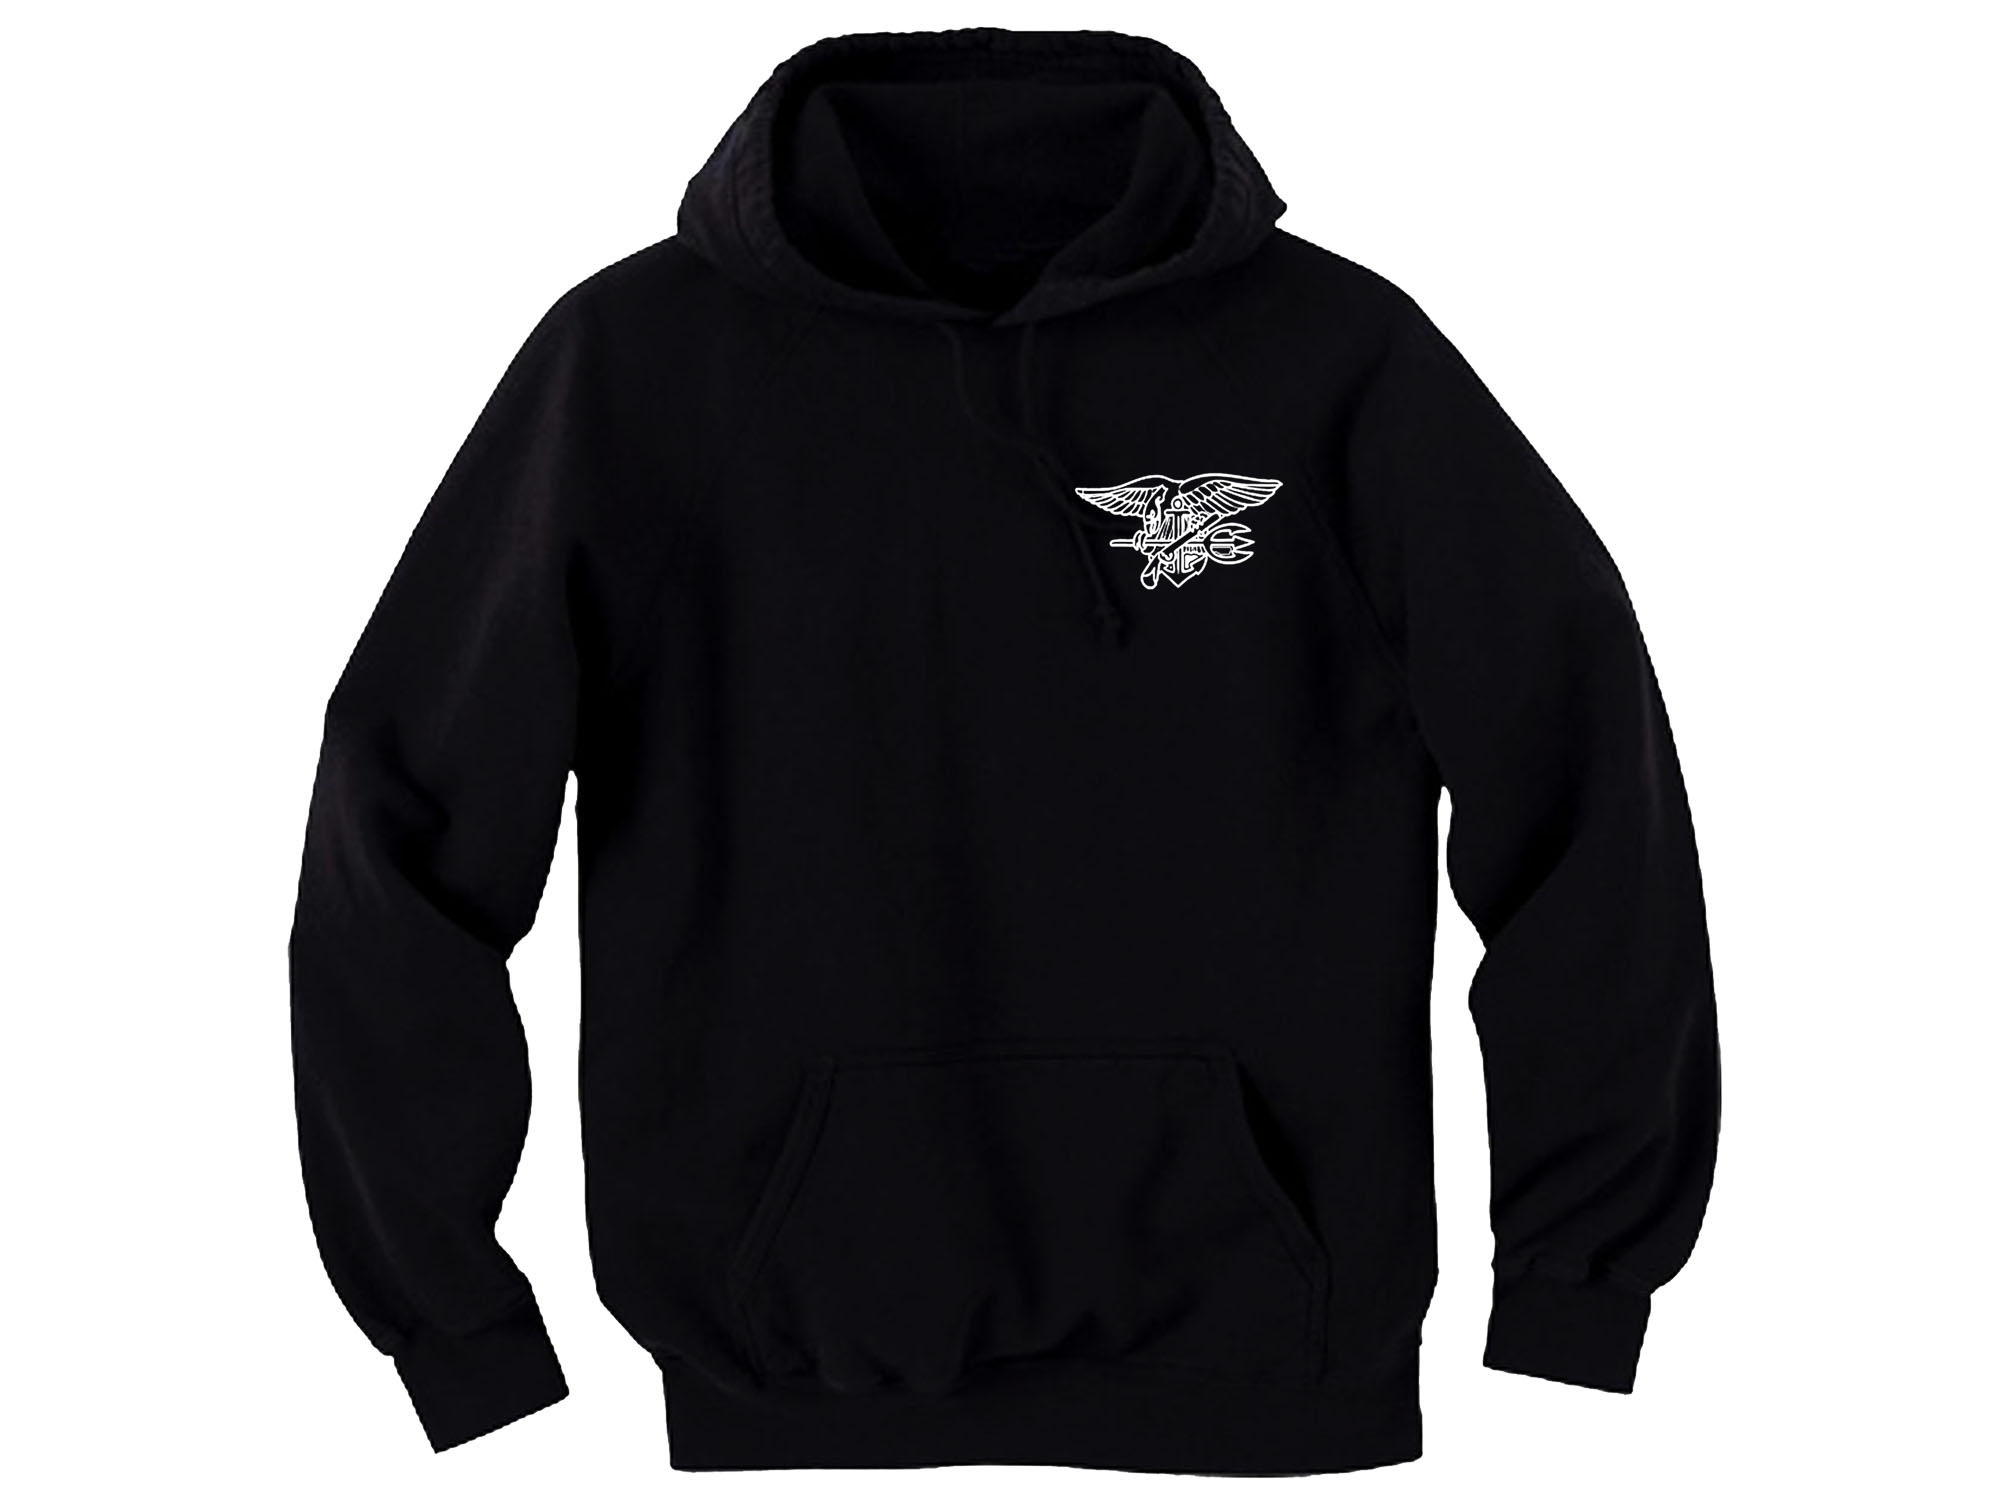 US special forces commando Navy Seals cheap sweat hoodie